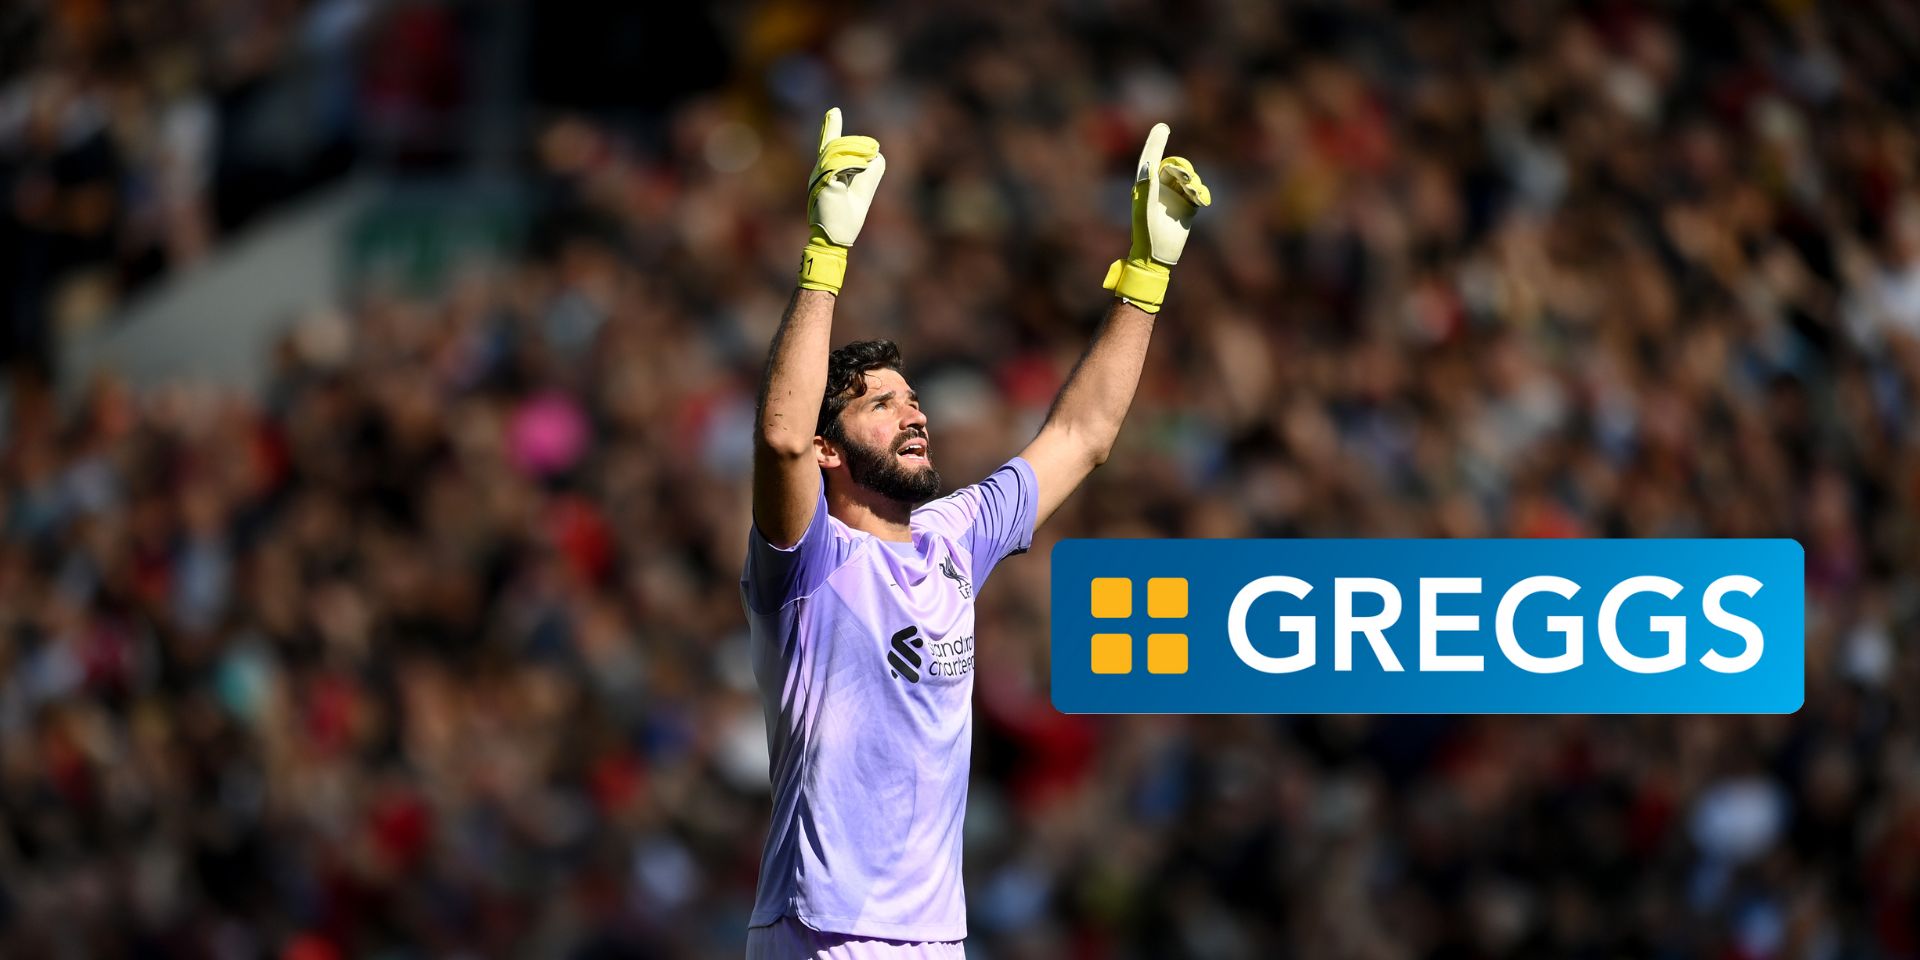 ‘Absolutely lost without it’ – Greggs hilariously compares Alisson to popular breakfast menu item